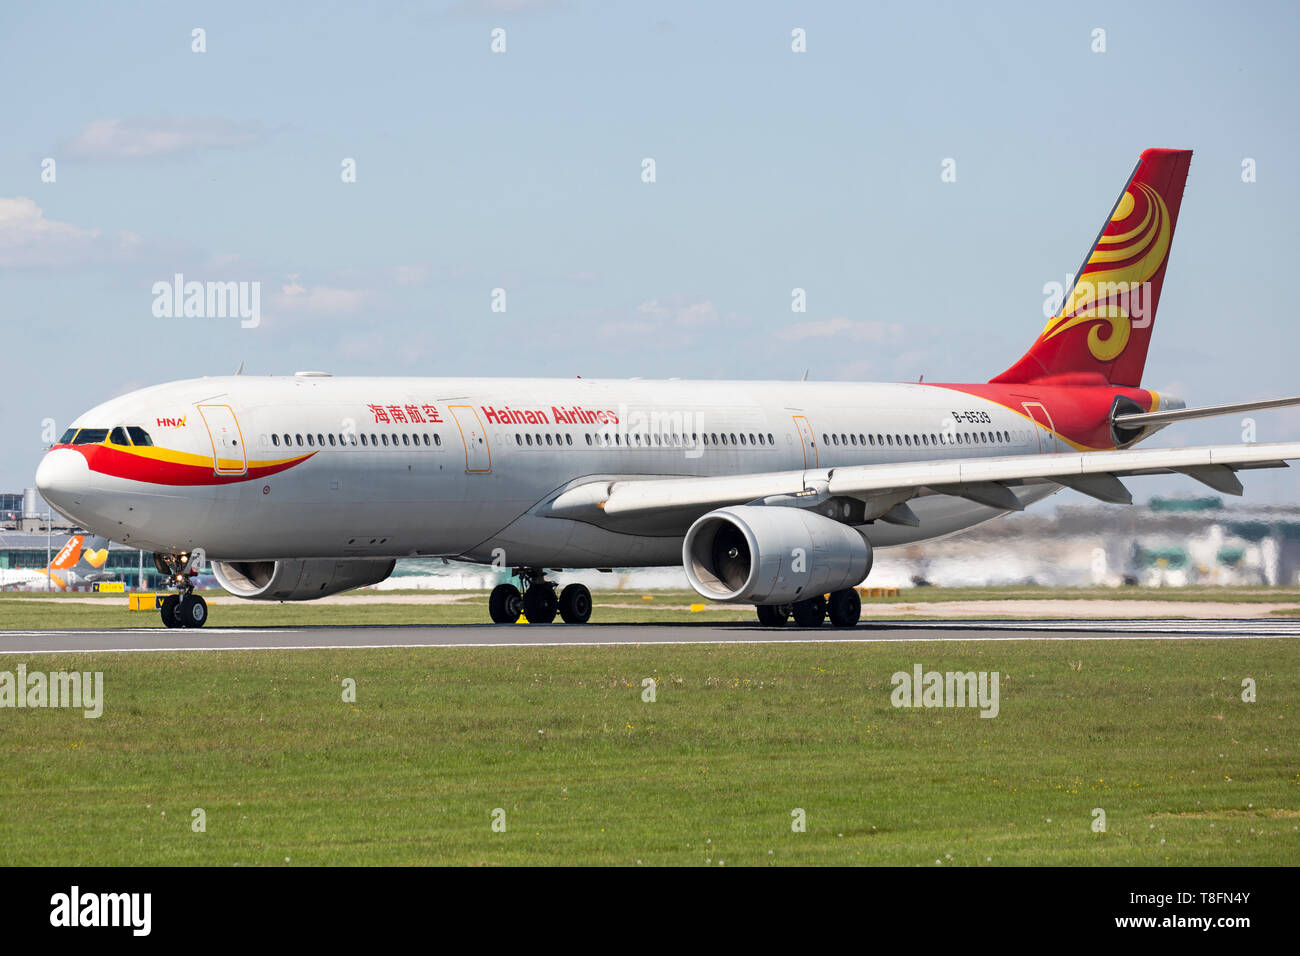 A Hainan Airlines of China Airbus A330, registration B-6539 preparing to take off from Manchester Airport, England. Stock Photo